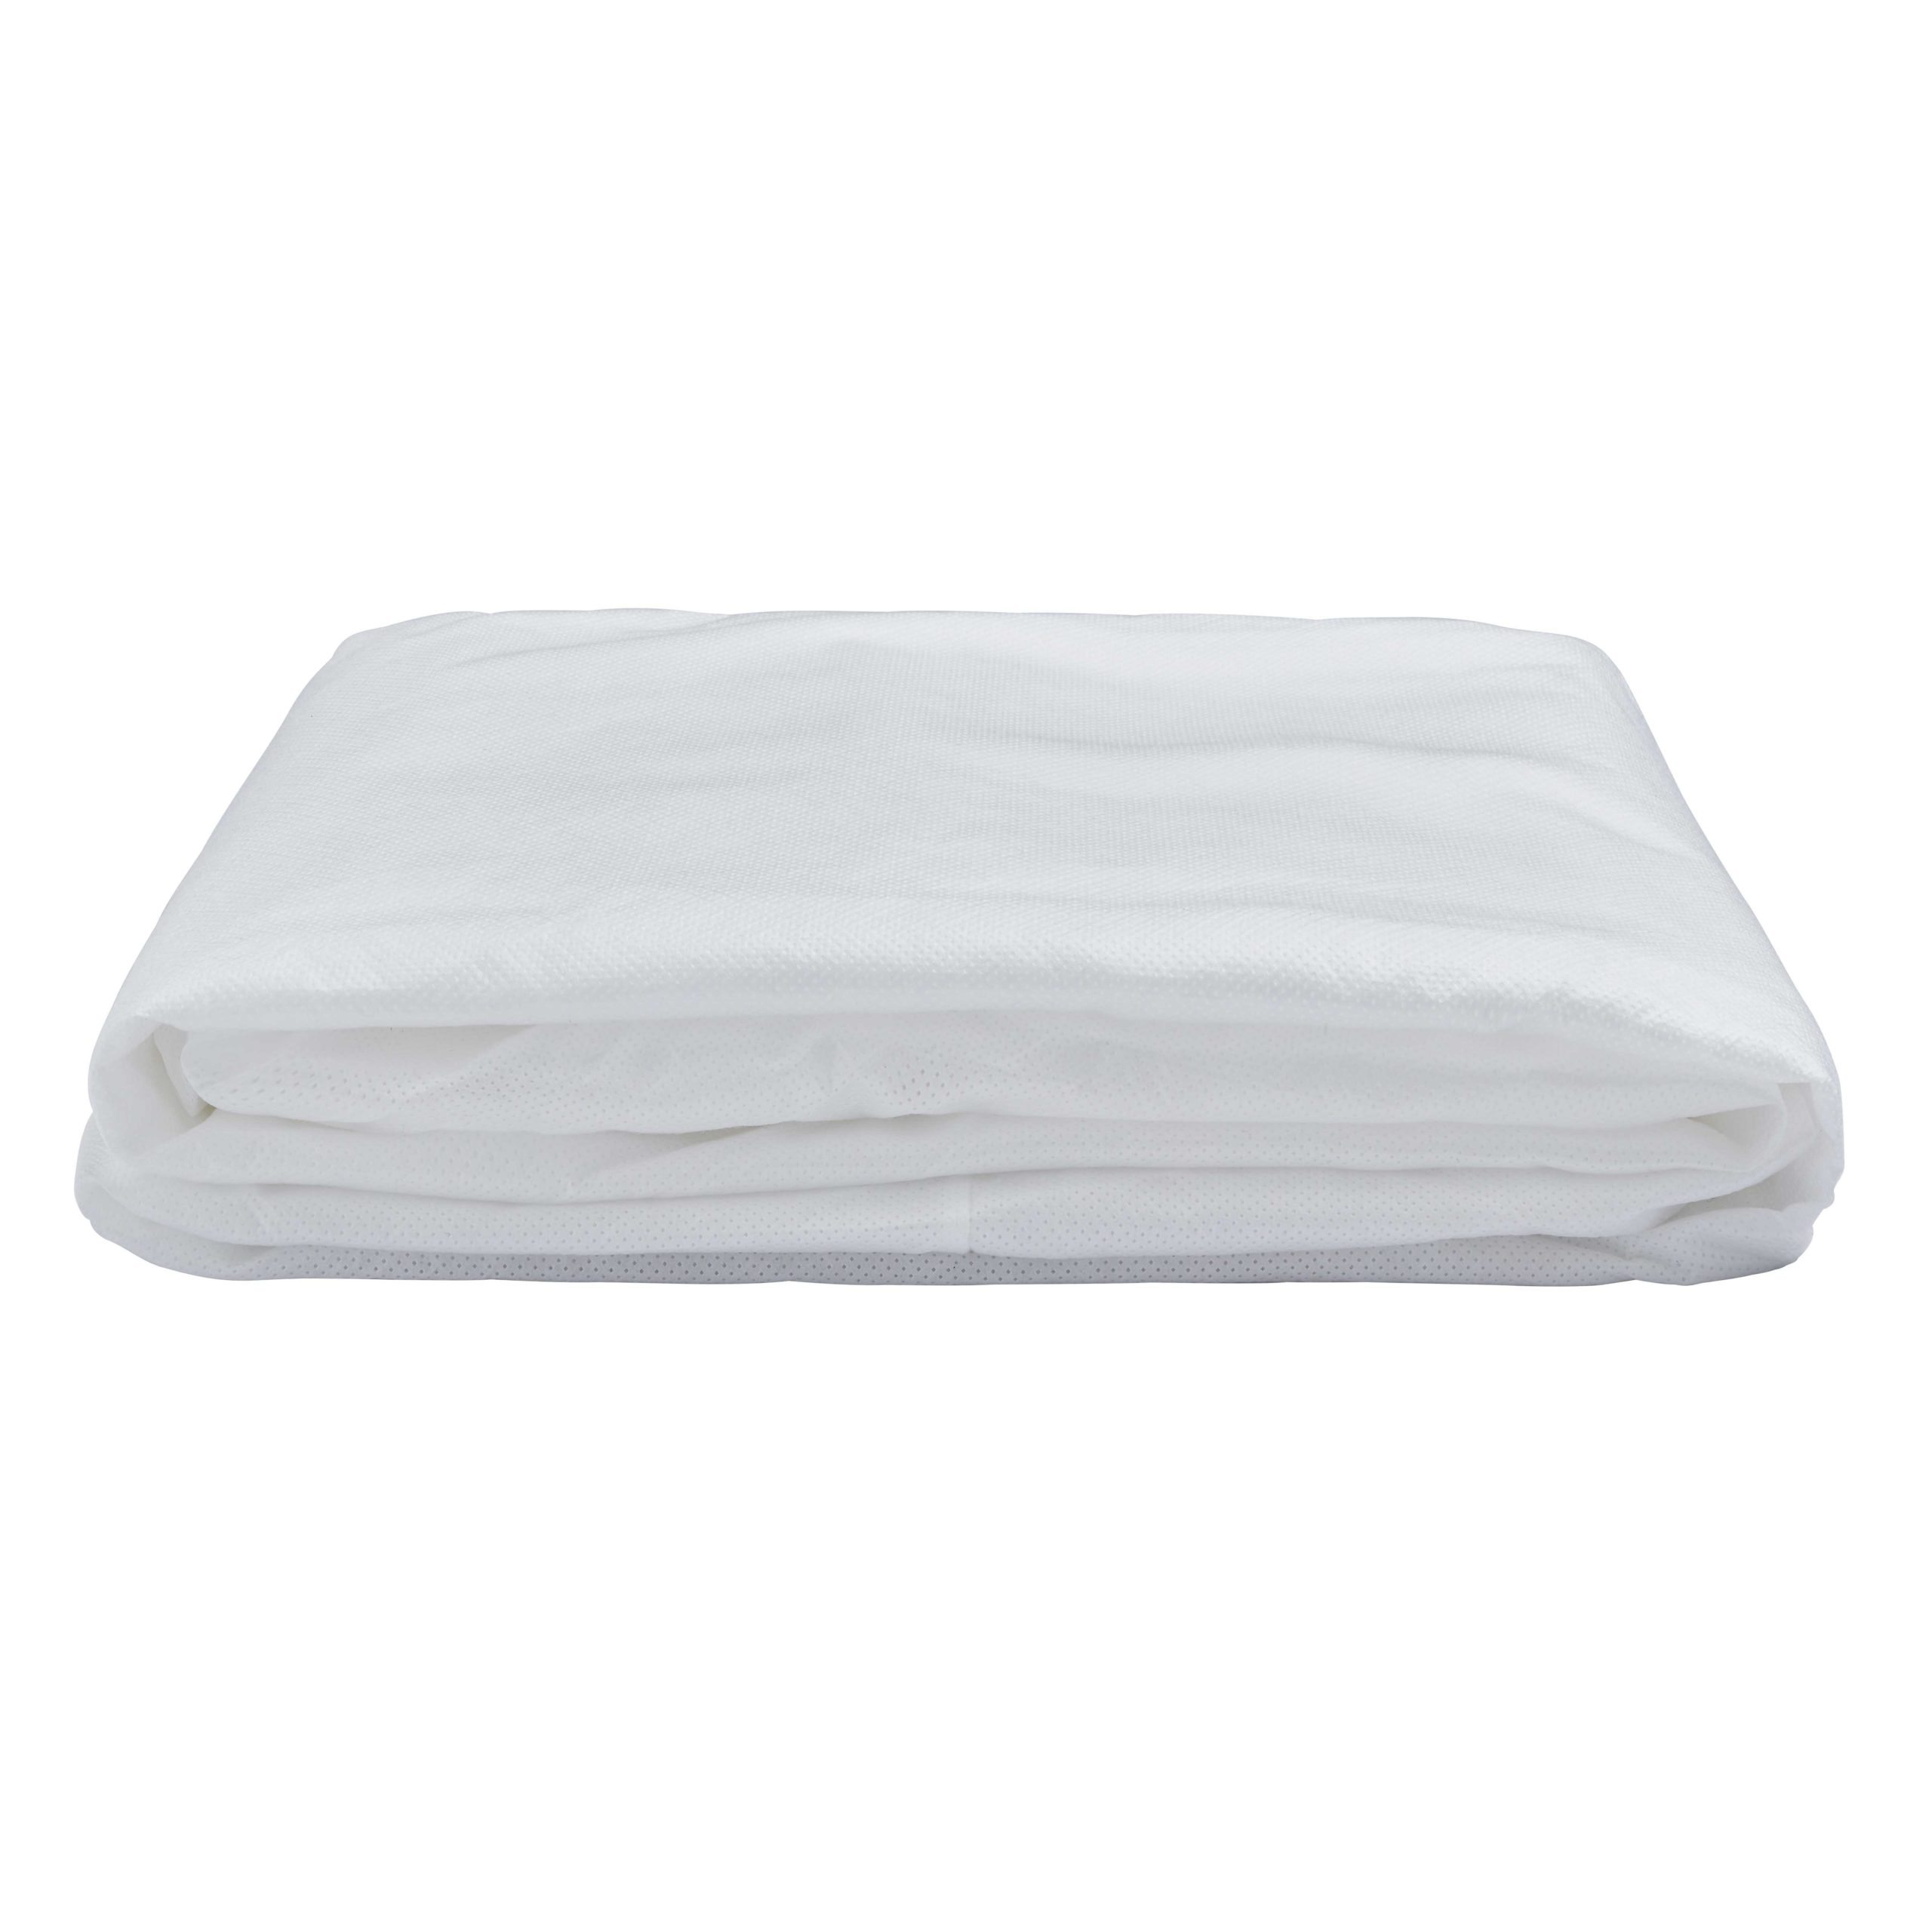 Anti Allergy Polypropelene Fully Enclosed Mattress Protector